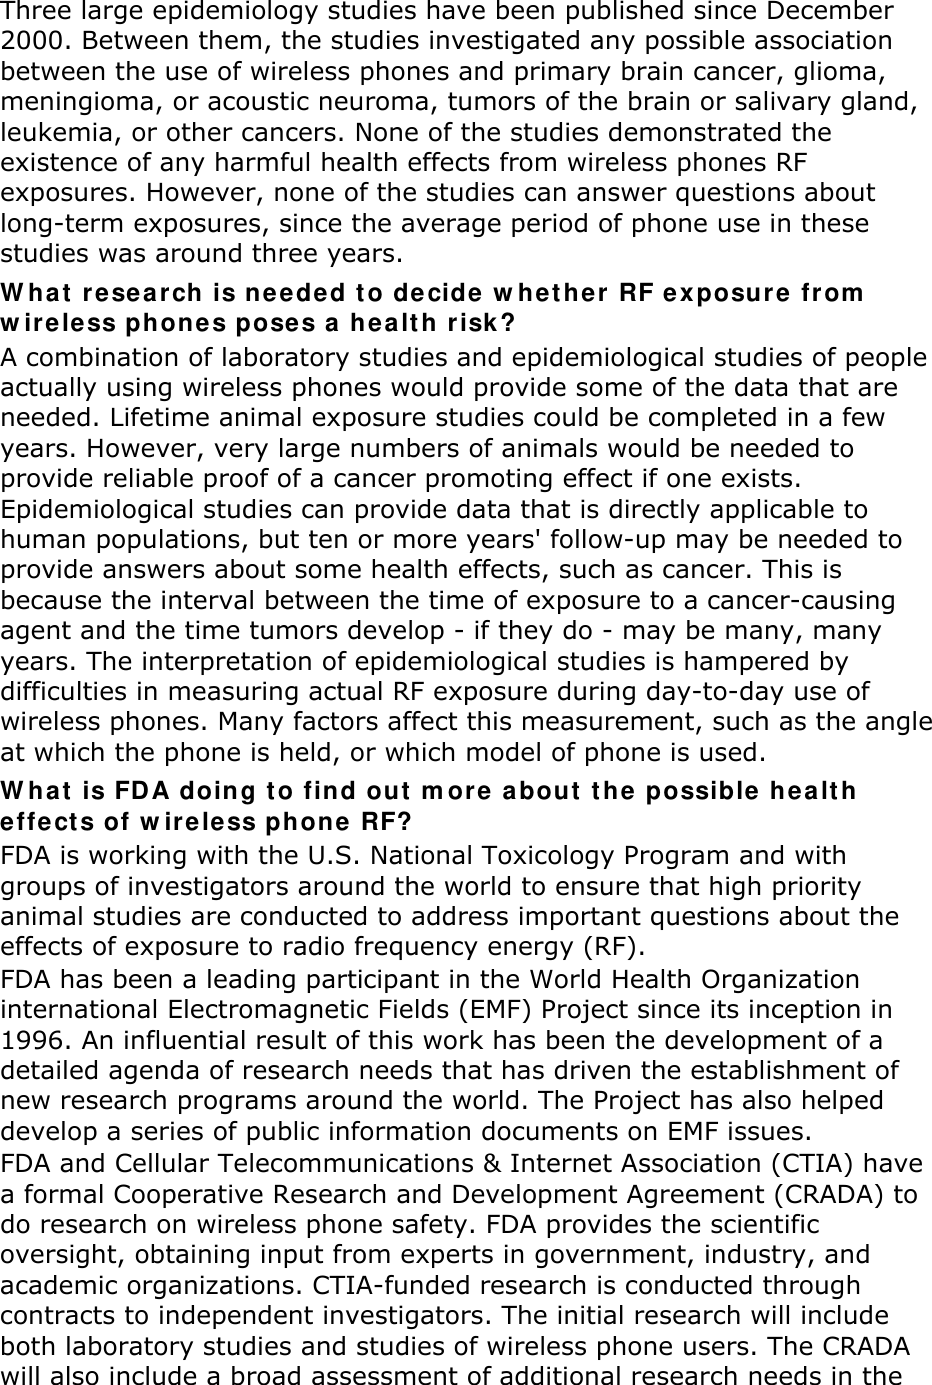 Three large epidemiology studies have been published since December 2000. Between them, the studies investigated any possible association between the use of wireless phones and primary brain cancer, glioma, meningioma, or acoustic neuroma, tumors of the brain or salivary gland, leukemia, or other cancers. None of the studies demonstrated the existence of any harmful health effects from wireless phones RF exposures. However, none of the studies can answer questions about long-term exposures, since the average period of phone use in these studies was around three years. W hat r ese arch is needed t o de cide w hethe r RF exposure  from  w ire less phon es poses a healt h r isk? A combination of laboratory studies and epidemiological studies of people actually using wireless phones would provide some of the data that are needed. Lifetime animal exposure studies could be completed in a few years. However, very large numbers of animals would be needed to provide reliable proof of a cancer promoting effect if one exists. Epidemiological studies can provide data that is directly applicable to human populations, but ten or more years&apos; follow-up may be needed to provide answers about some health effects, such as cancer. This is because the interval between the time of exposure to a cancer-causing agent and the time tumors develop - if they do - may be many, many years. The interpretation of epidemiological studies is hampered by difficulties in measuring actual RF exposure during day-to-day use of wireless phones. Many factors affect this measurement, such as the angle at which the phone is held, or which model of phone is used. W hat is FD A doing t o find out  m ore about  t he  possible  healt h effect s of w ireless phone RF? FDA is working with the U.S. National Toxicology Program and with groups of investigators around the world to ensure that high priority animal studies are conducted to address important questions about the effects of exposure to radio frequency energy (RF). FDA has been a leading participant in the World Health Organization international Electromagnetic Fields (EMF) Project since its inception in 1996. An influential result of this work has been the development of a detailed agenda of research needs that has driven the establishment of new research programs around the world. The Project has also helped develop a series of public information documents on EMF issues. FDA and Cellular Telecommunications &amp; Internet Association (CTIA) have a formal Cooperative Research and Development Agreement (CRADA) to do research on wireless phone safety. FDA provides the scientific oversight, obtaining input from experts in government, industry, and academic organizations. CTIA-funded research is conducted through contracts to independent investigators. The initial research will include both laboratory studies and studies of wireless phone users. The CRADA will also include a broad assessment of additional research needs in the 